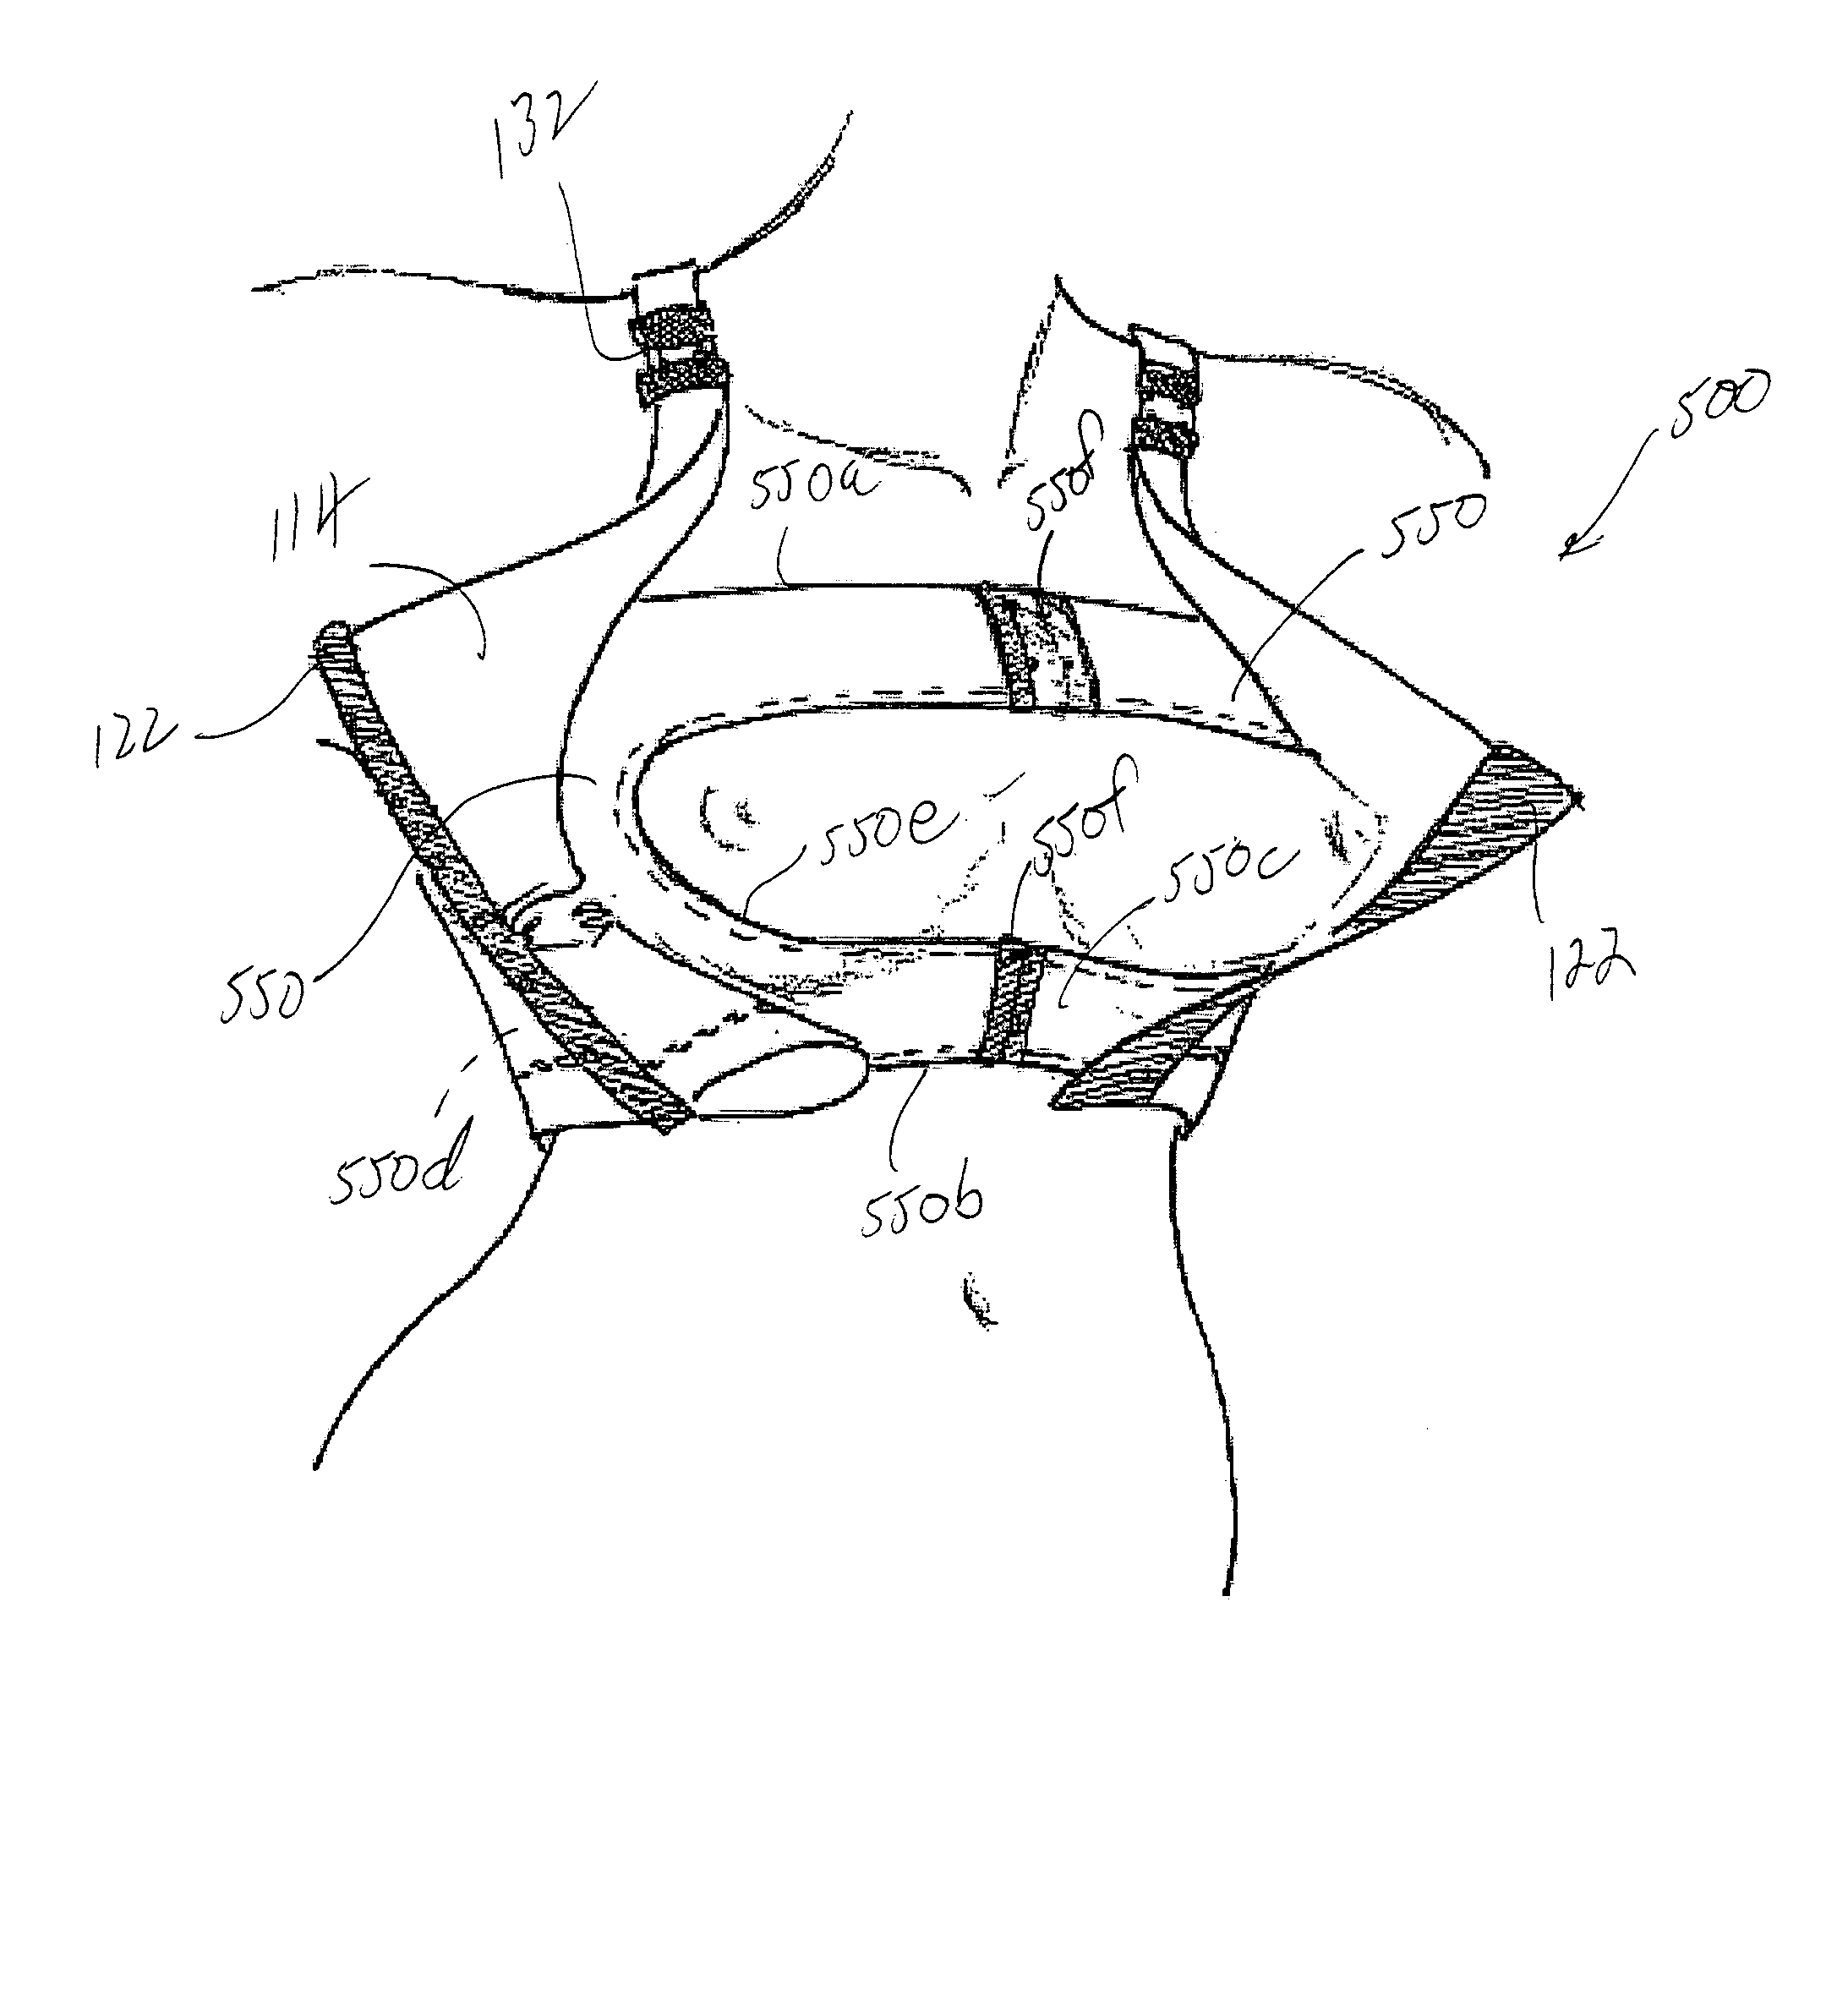 Garment with breast implant stabilizers